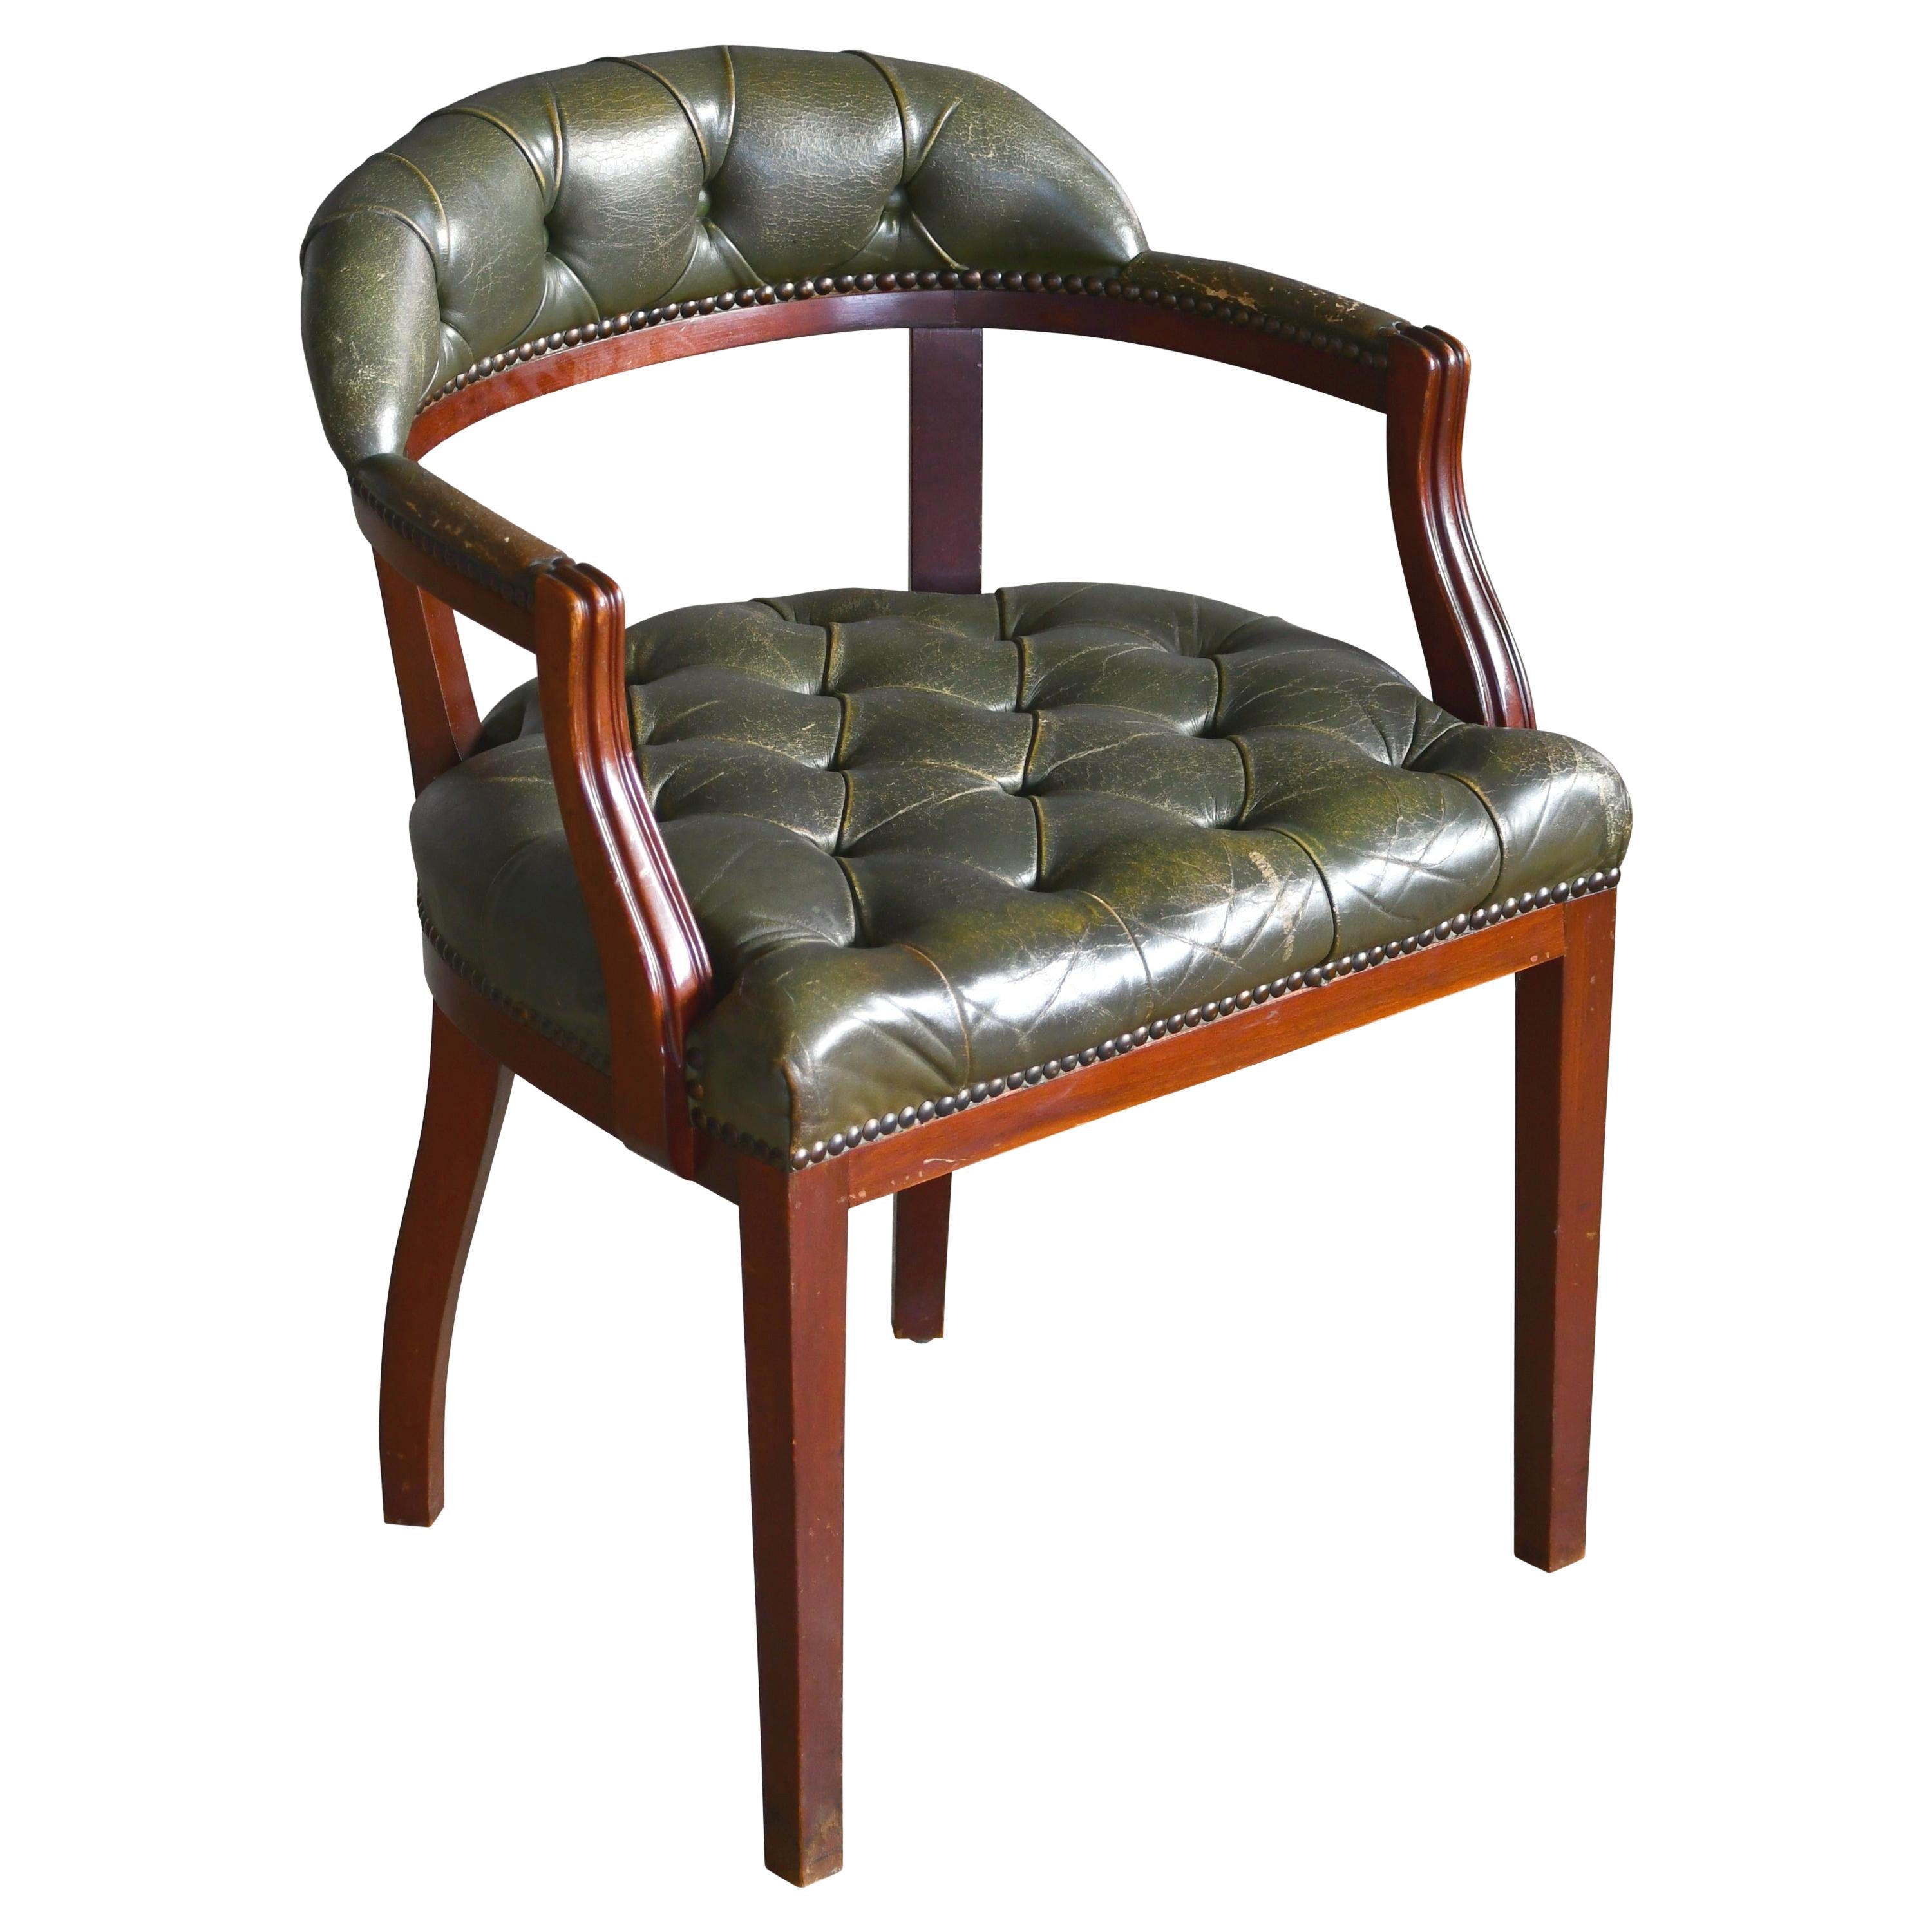 Midcentury Danish Chesterfield Style Court Chair in Patinated Green Leather